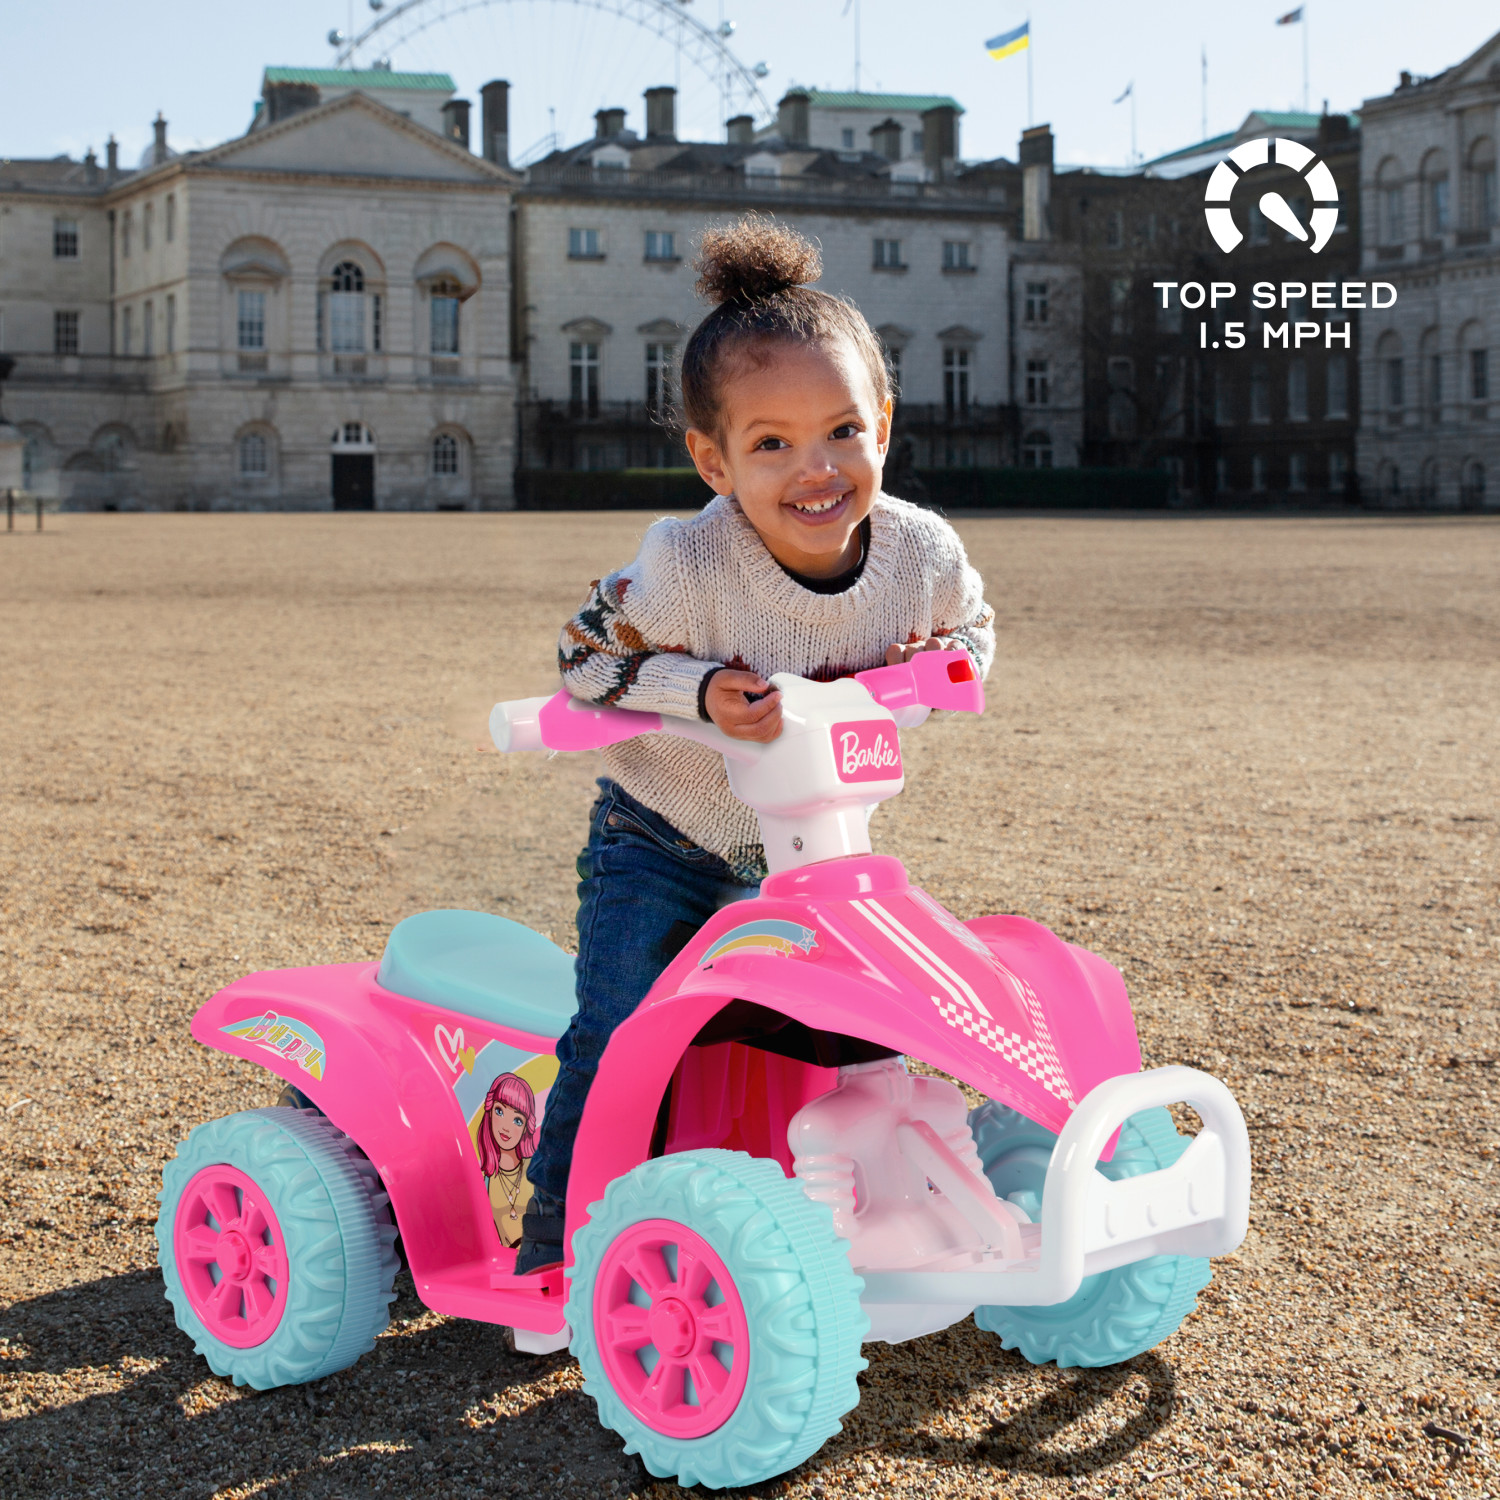 Licensed Barbie 6V Battery Powered Ride on ATV for Kids Ages 2-5 Years Old, Pink - image 2 of 13